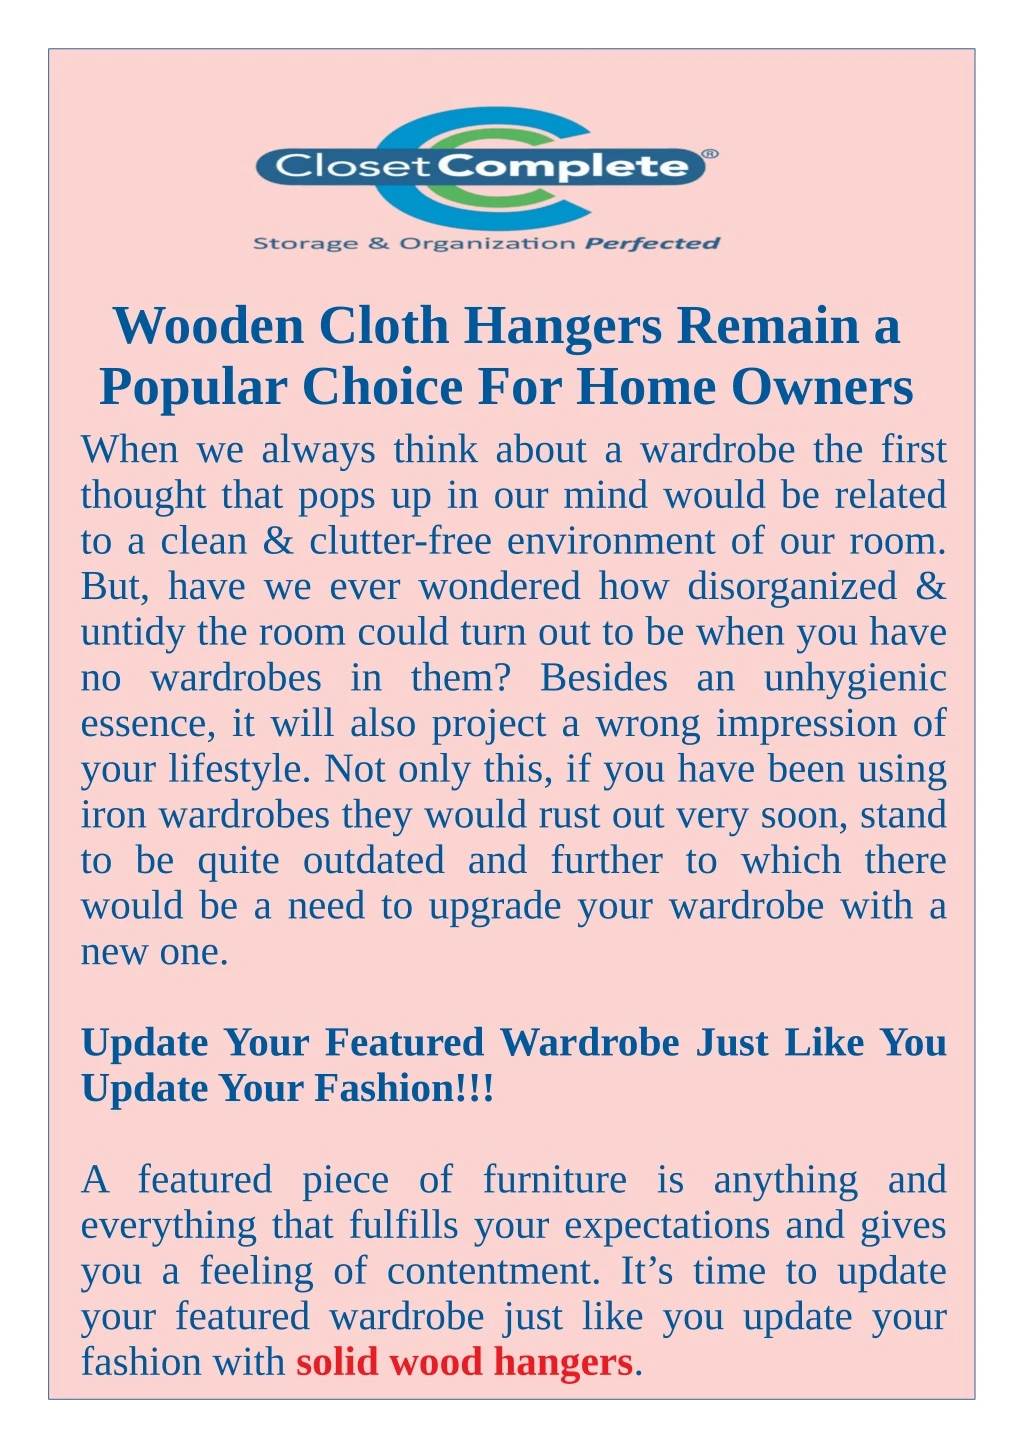 wooden cloth hangers remain a popular choice